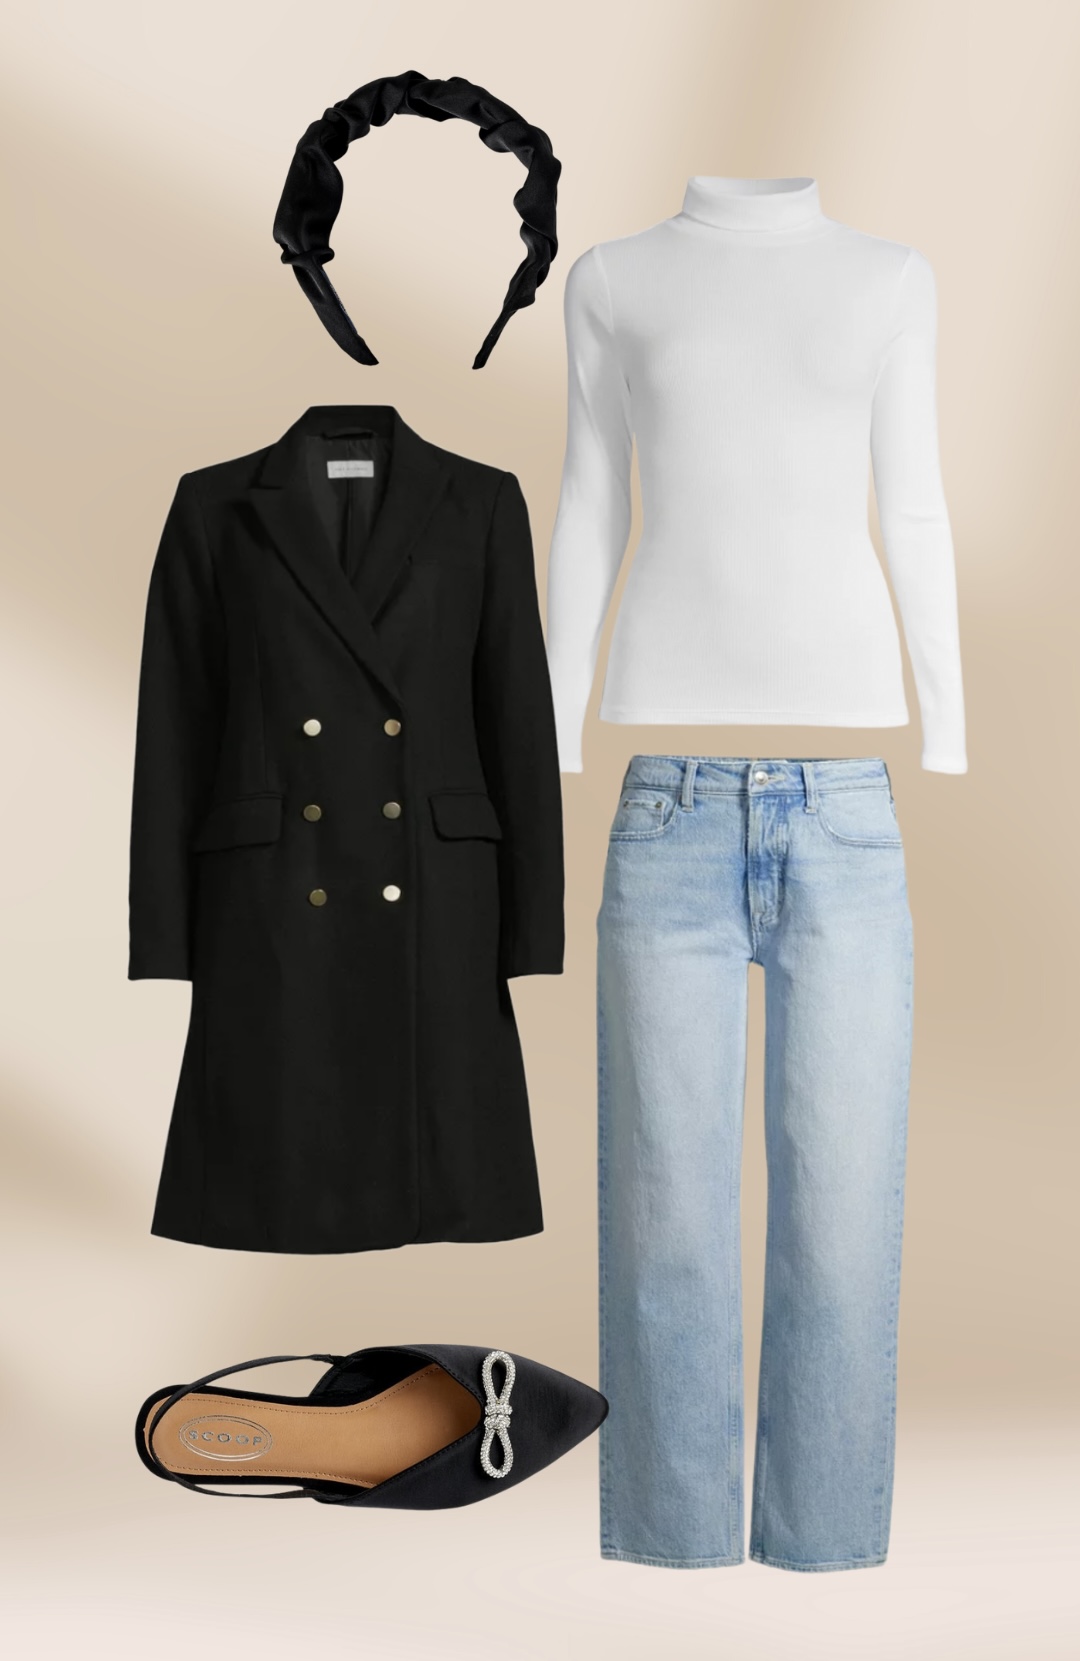 Photos of cozy clothing; jeans, jacket, trend coat, accessories, and shoes.